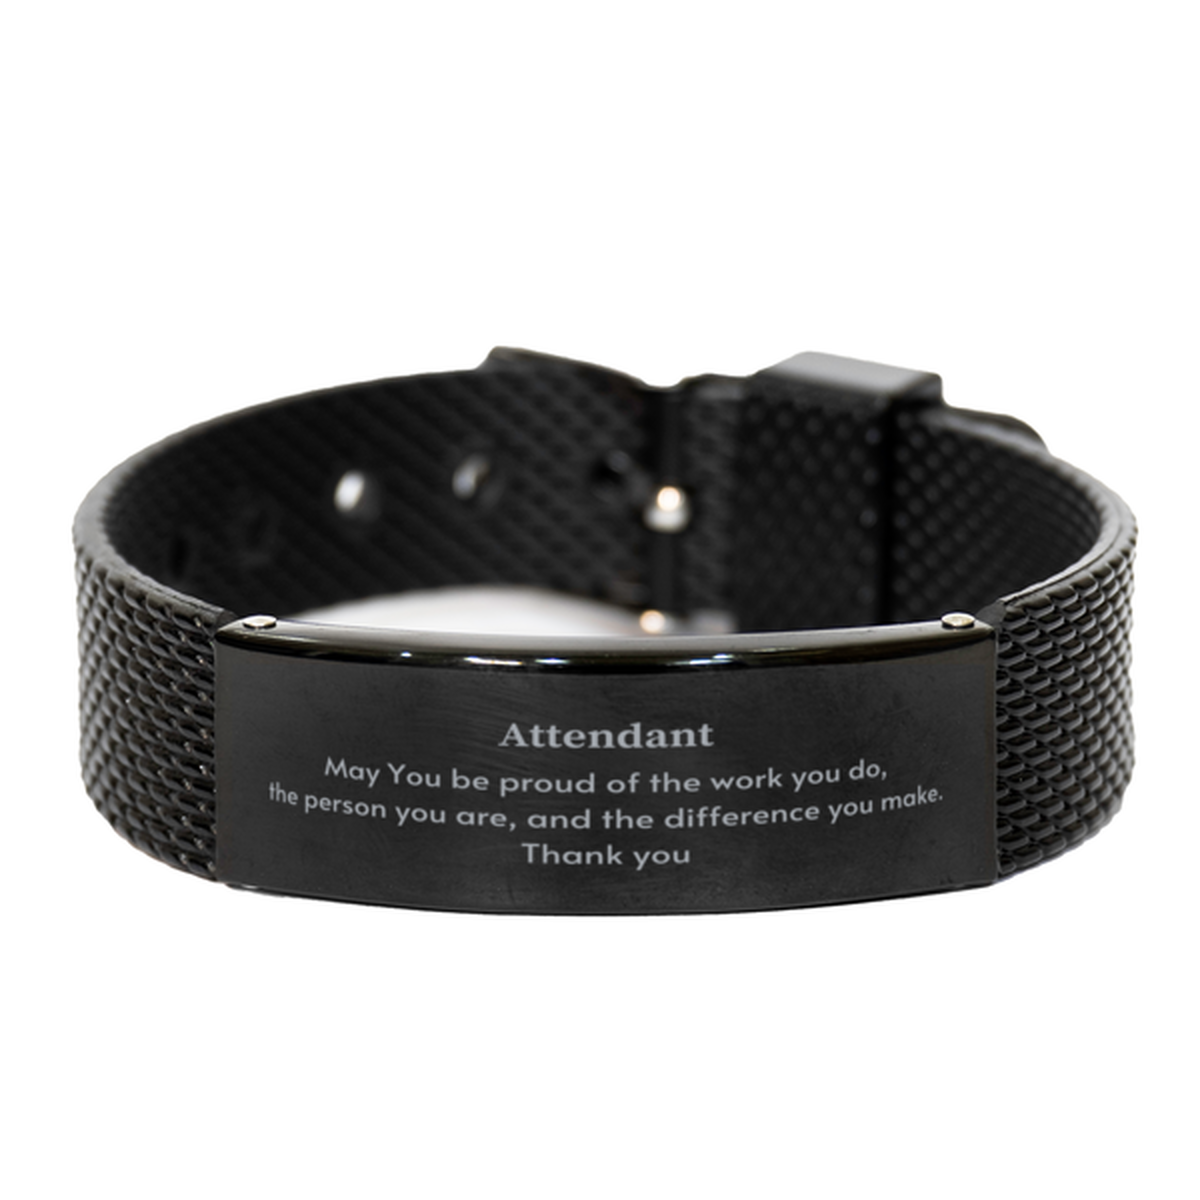 Heartwarming Black Shark Mesh Bracelet Retirement Coworkers Gifts for Attendant, Attendant May You be proud of the work you do, the person you are Gifts for Boss Men Women Friends